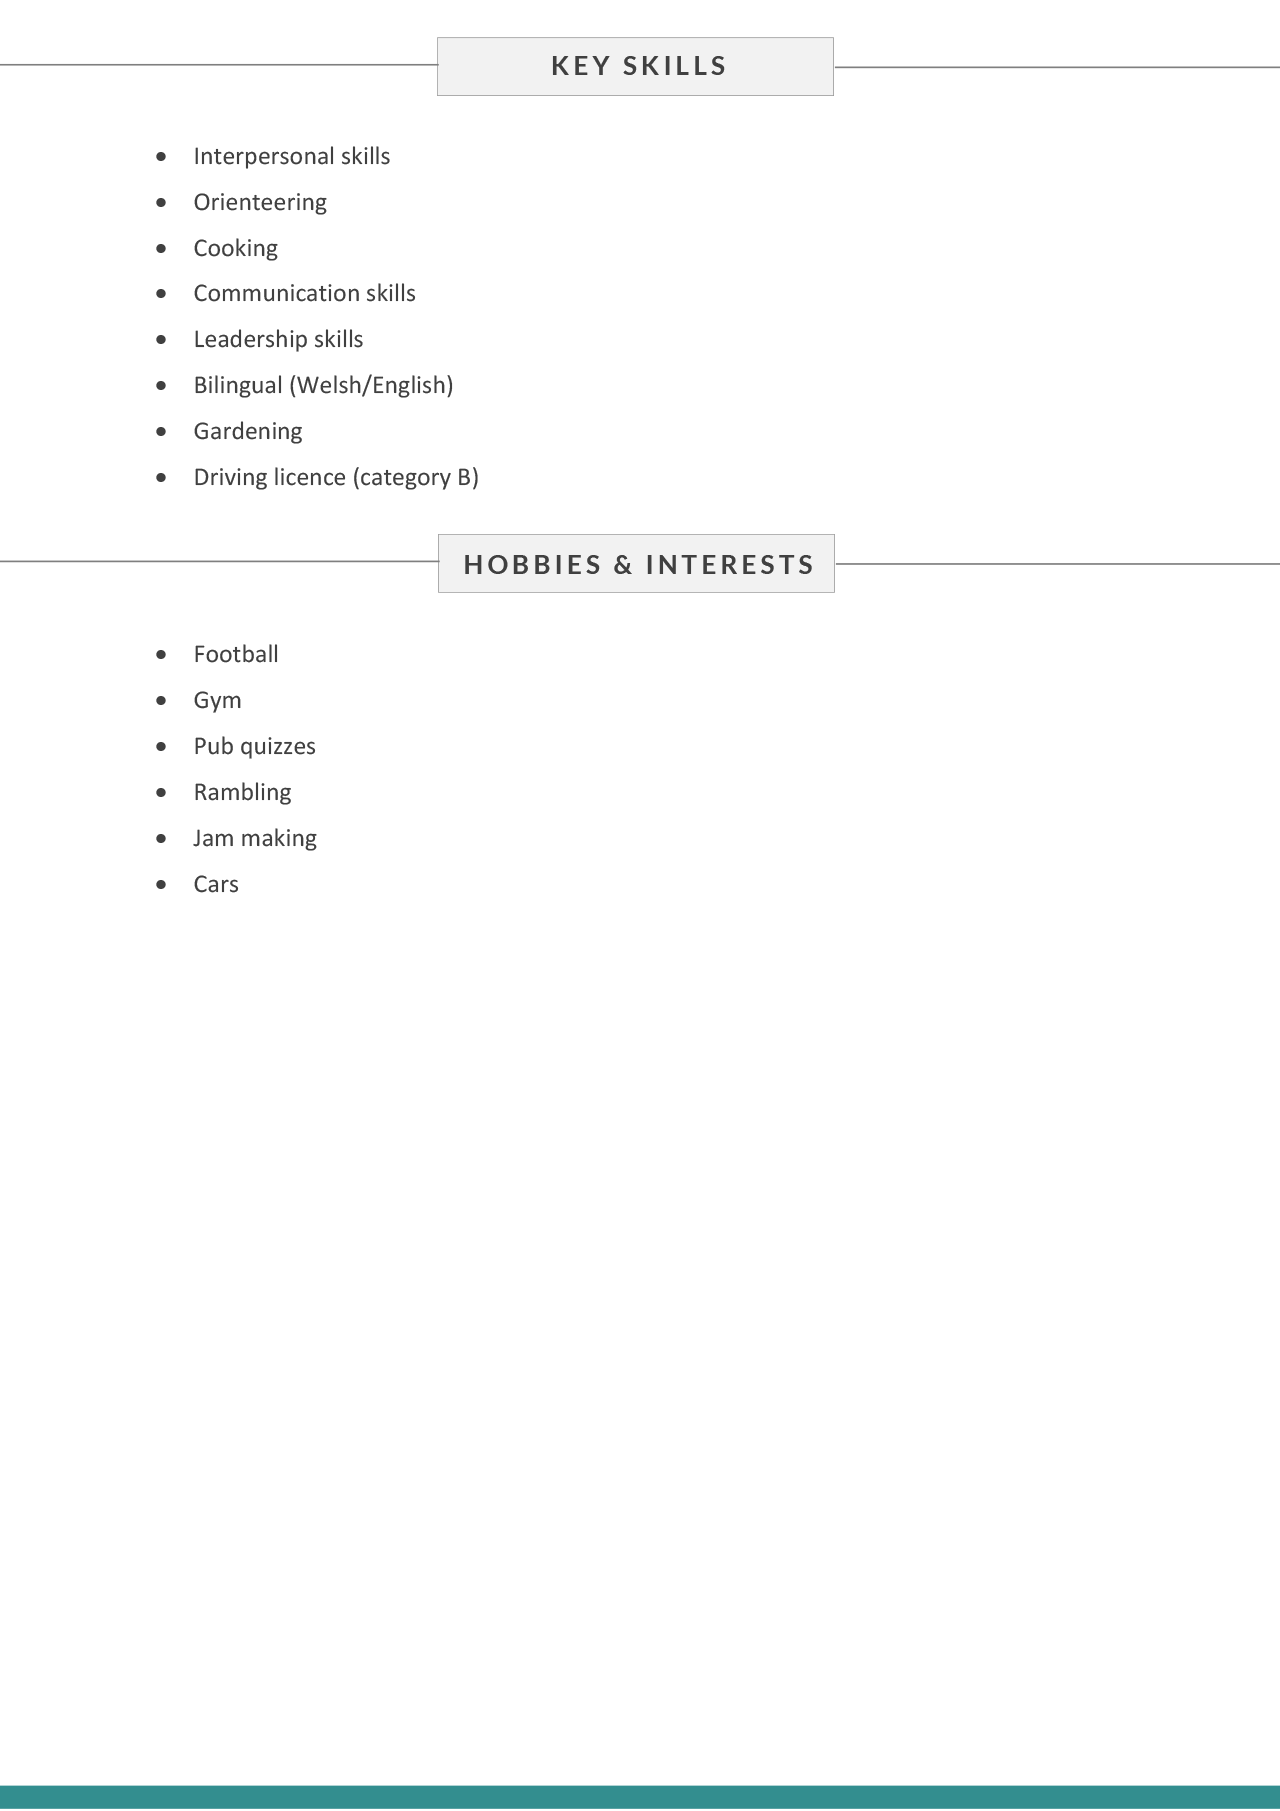 The second page of a school leaver CV example